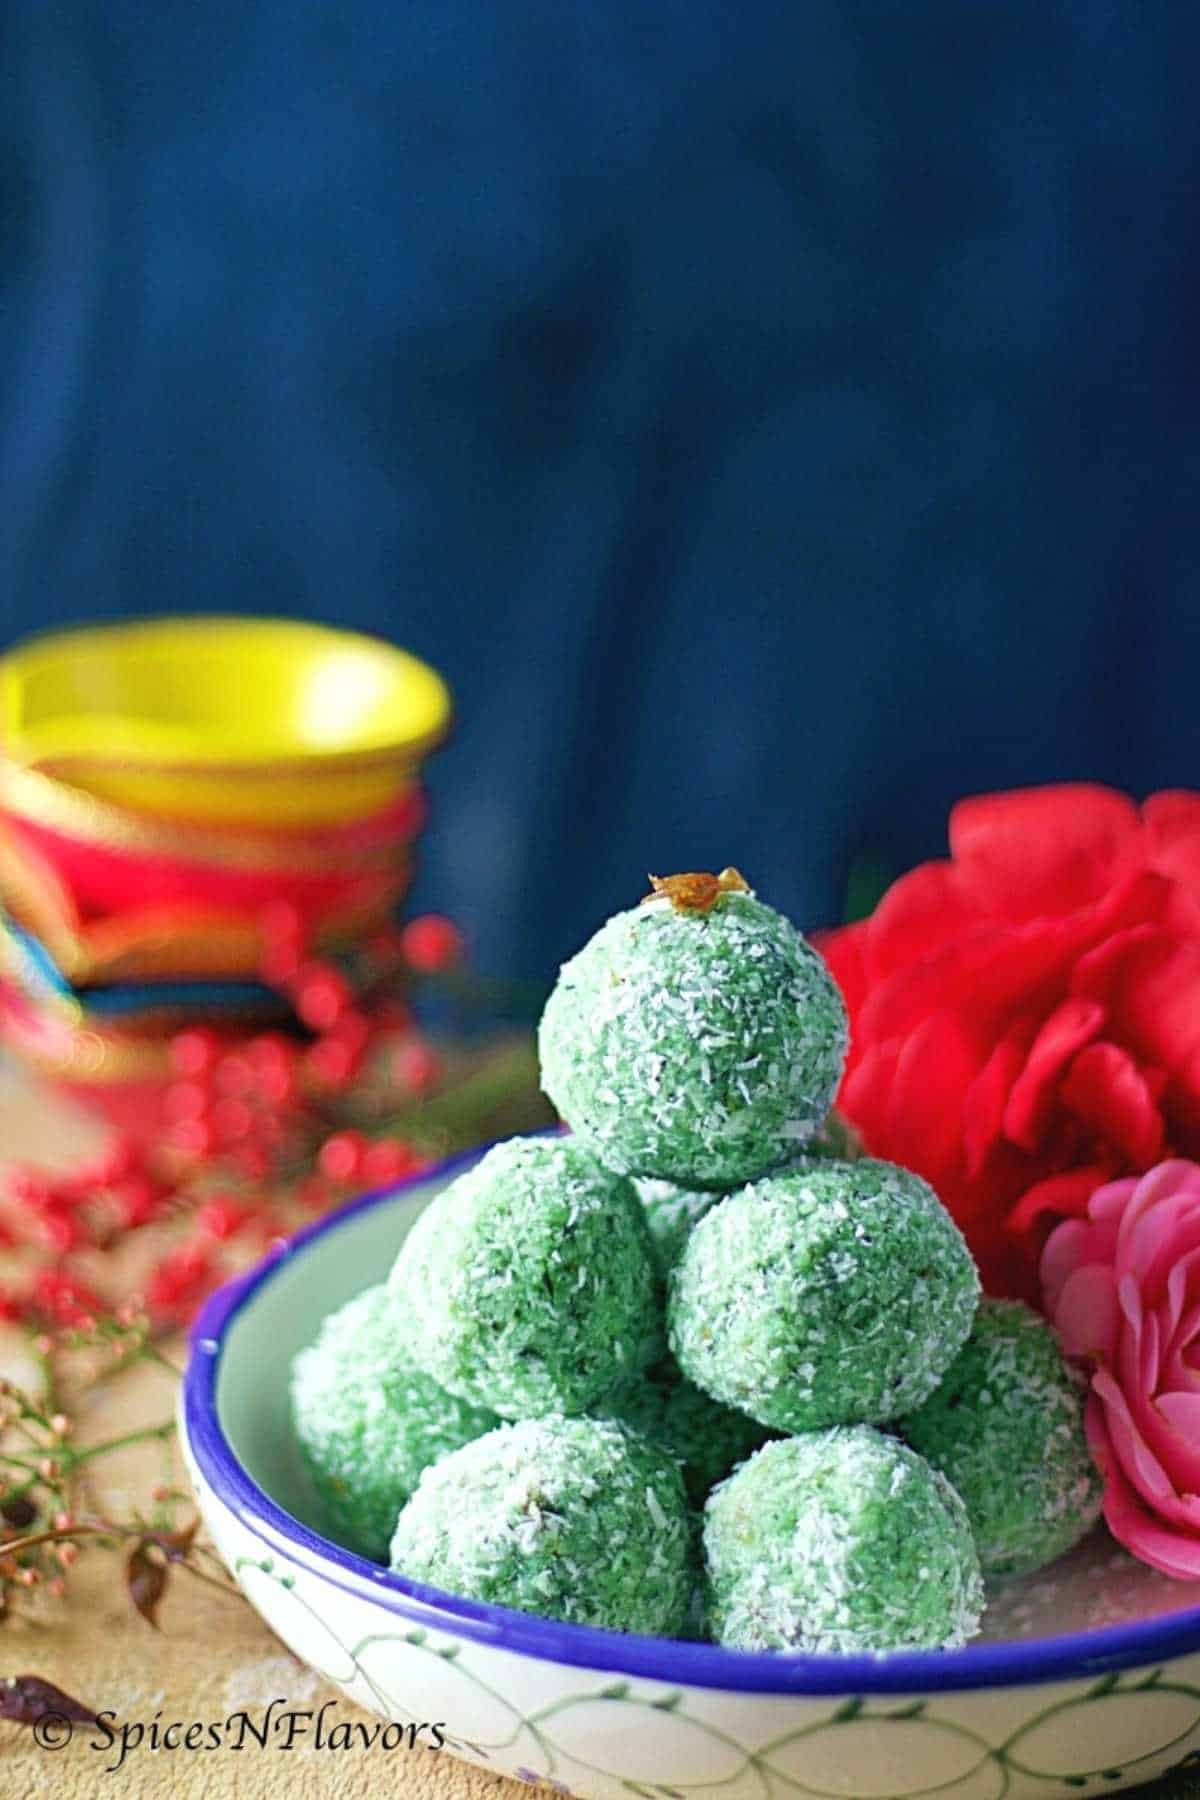 paan laddu stacked like a pyramid placed over a blue and white bowl